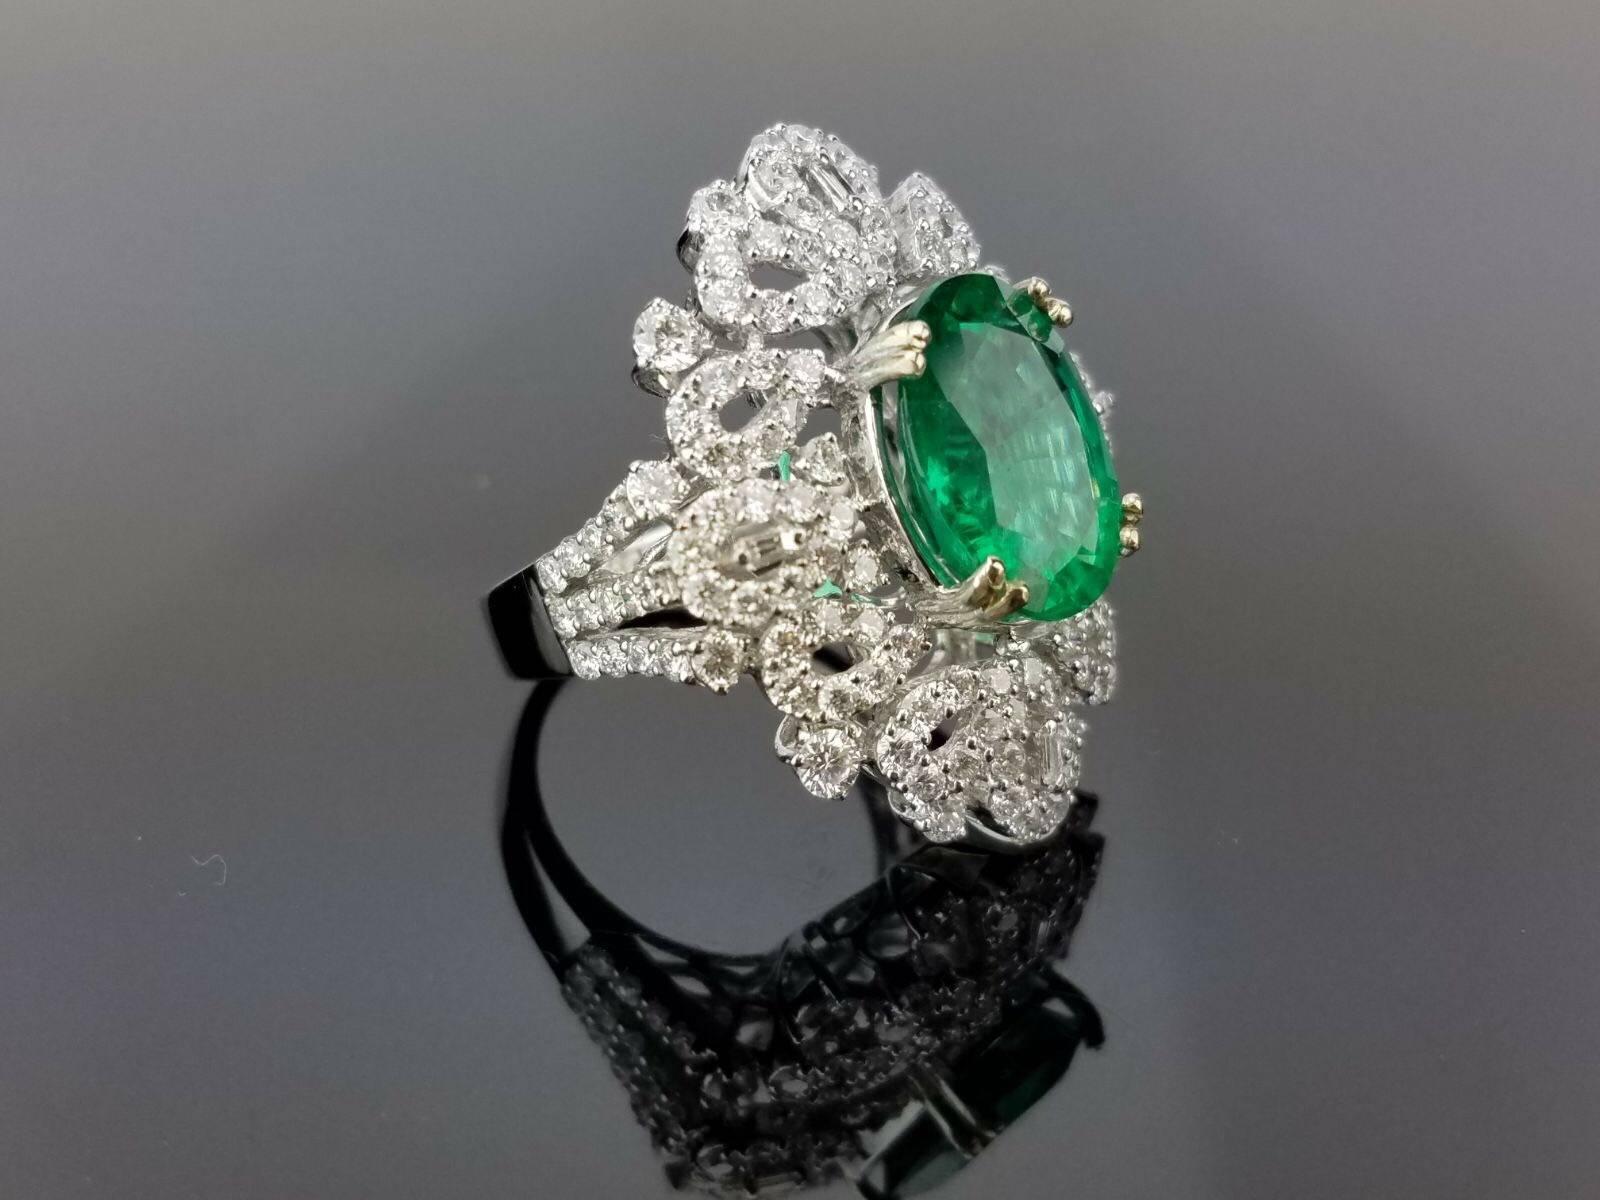 An eye-catching cocktail ring, with a beautiful emerald centre stone embellished with white diamonds, all set in 18K white gold. 

Stone Details: 
Stone: Emerald
Cut: Oval
Carat Weight: 4.95 Carat

Diamond Details:
Total Carat Weight: 2.94